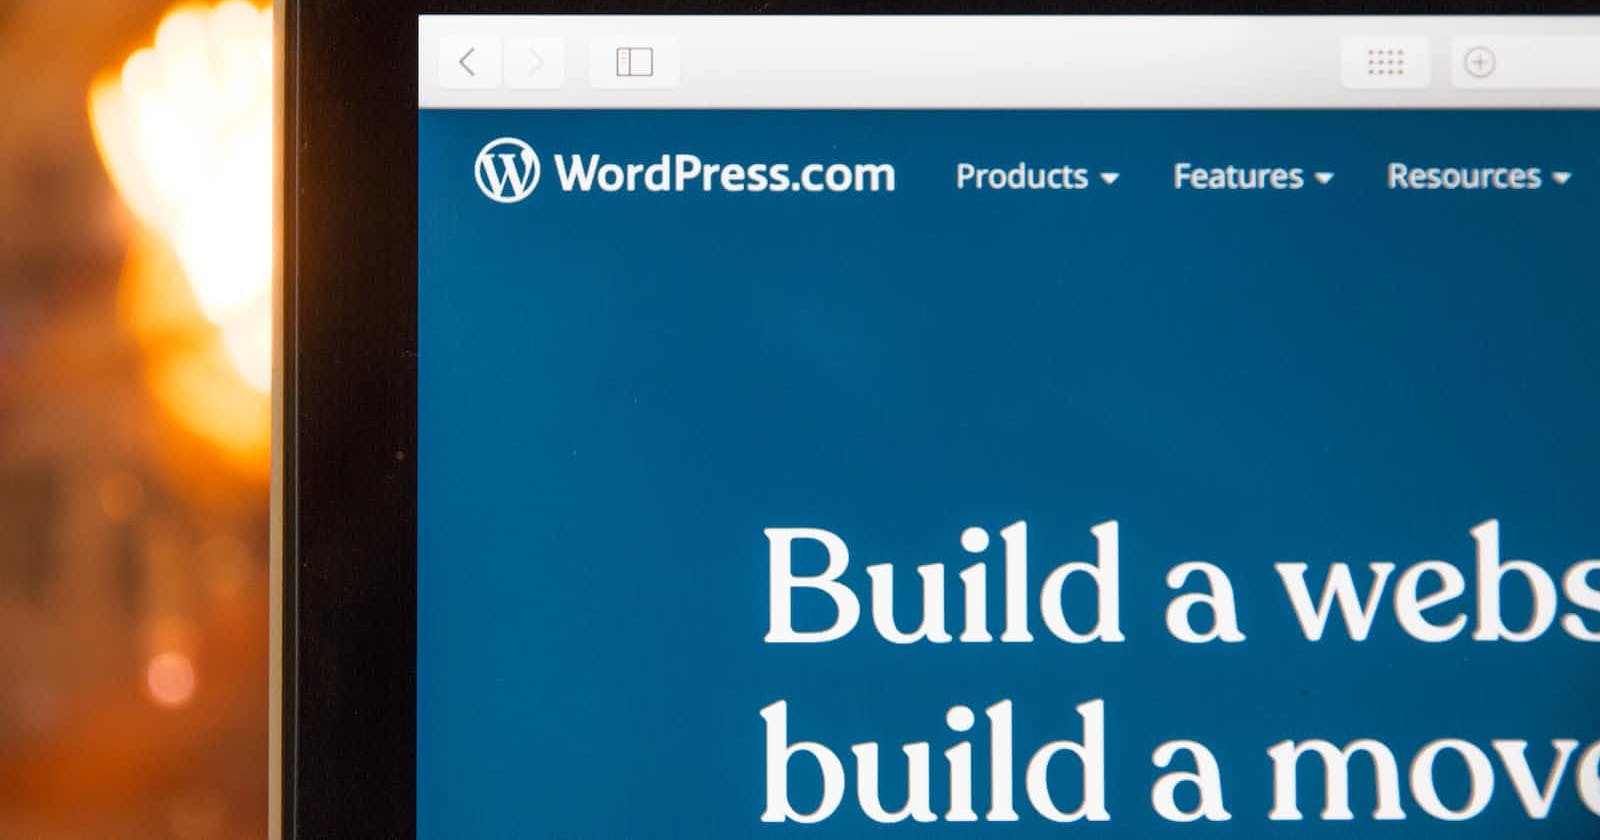 WordPress SiteBuild Project in 2023 and commentary on the experience